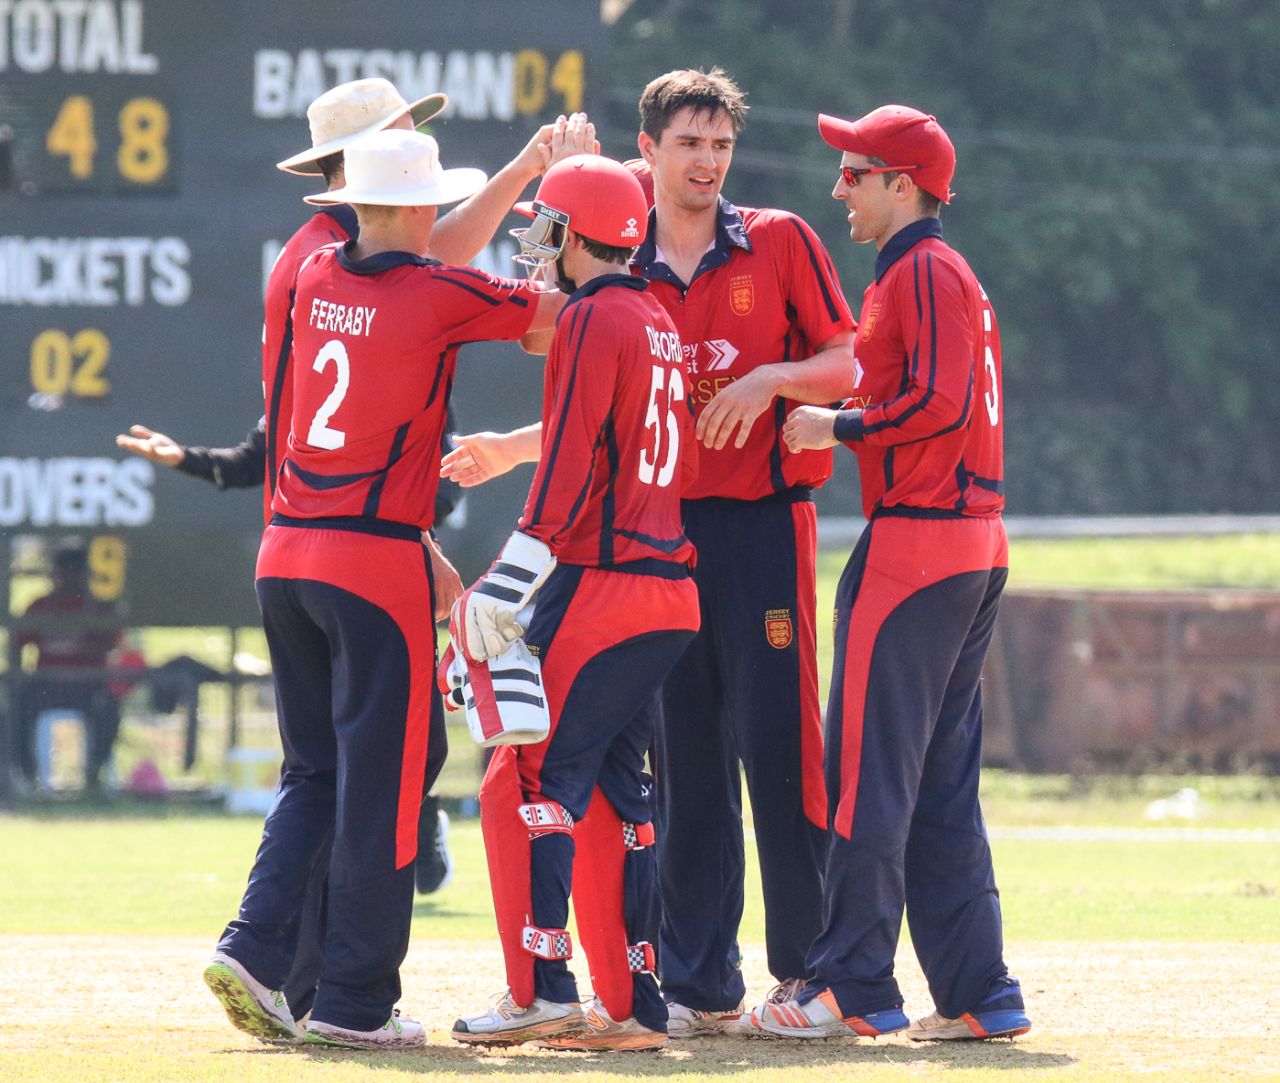 Ben Stevens was at the center of the action after taking another bag full of wickets for Jersey, Jersey v Vanuatu, ICC World Cricket League Division Four, Bangi, April 29, 2018